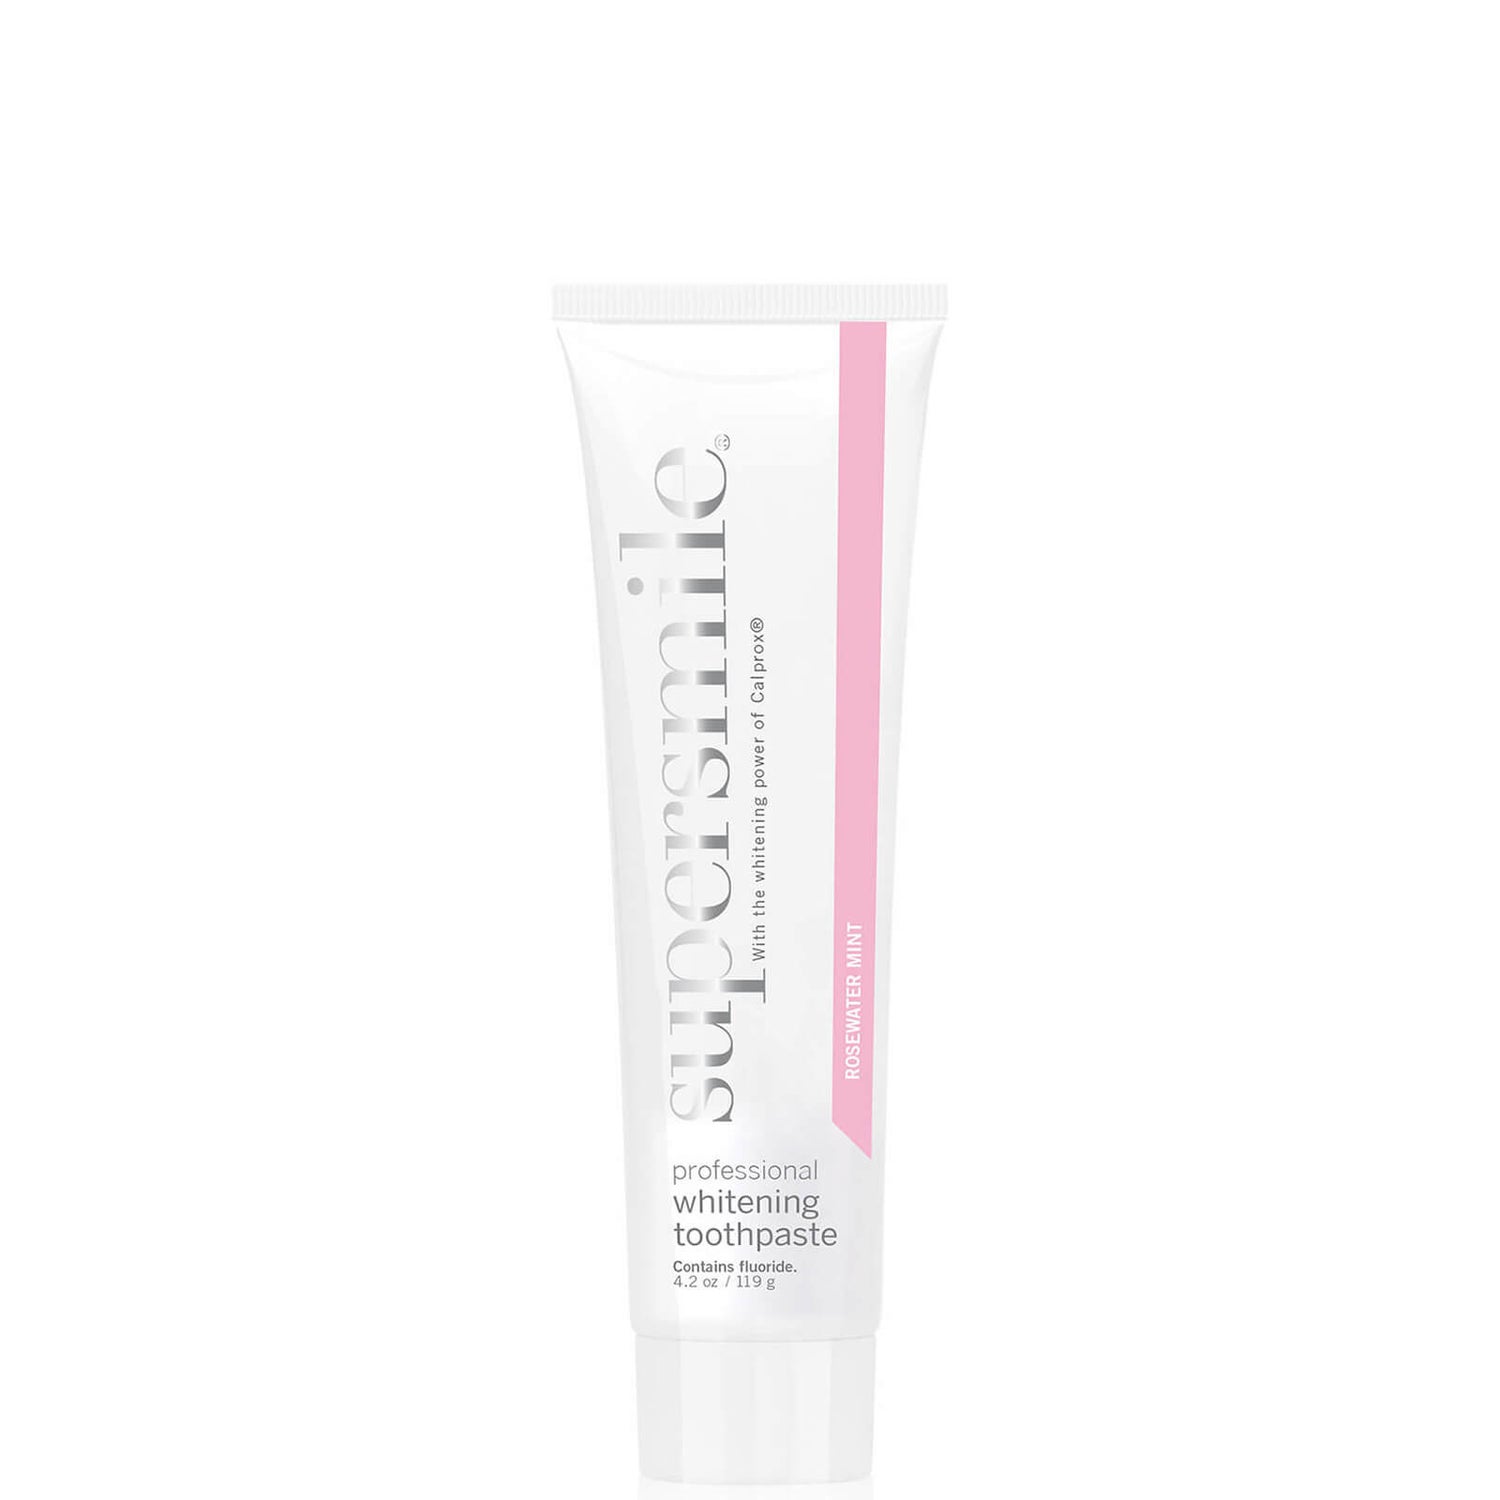 Supersmile Professional Whitening Toothpaste - Rosewater Mint (4.2 oz.)